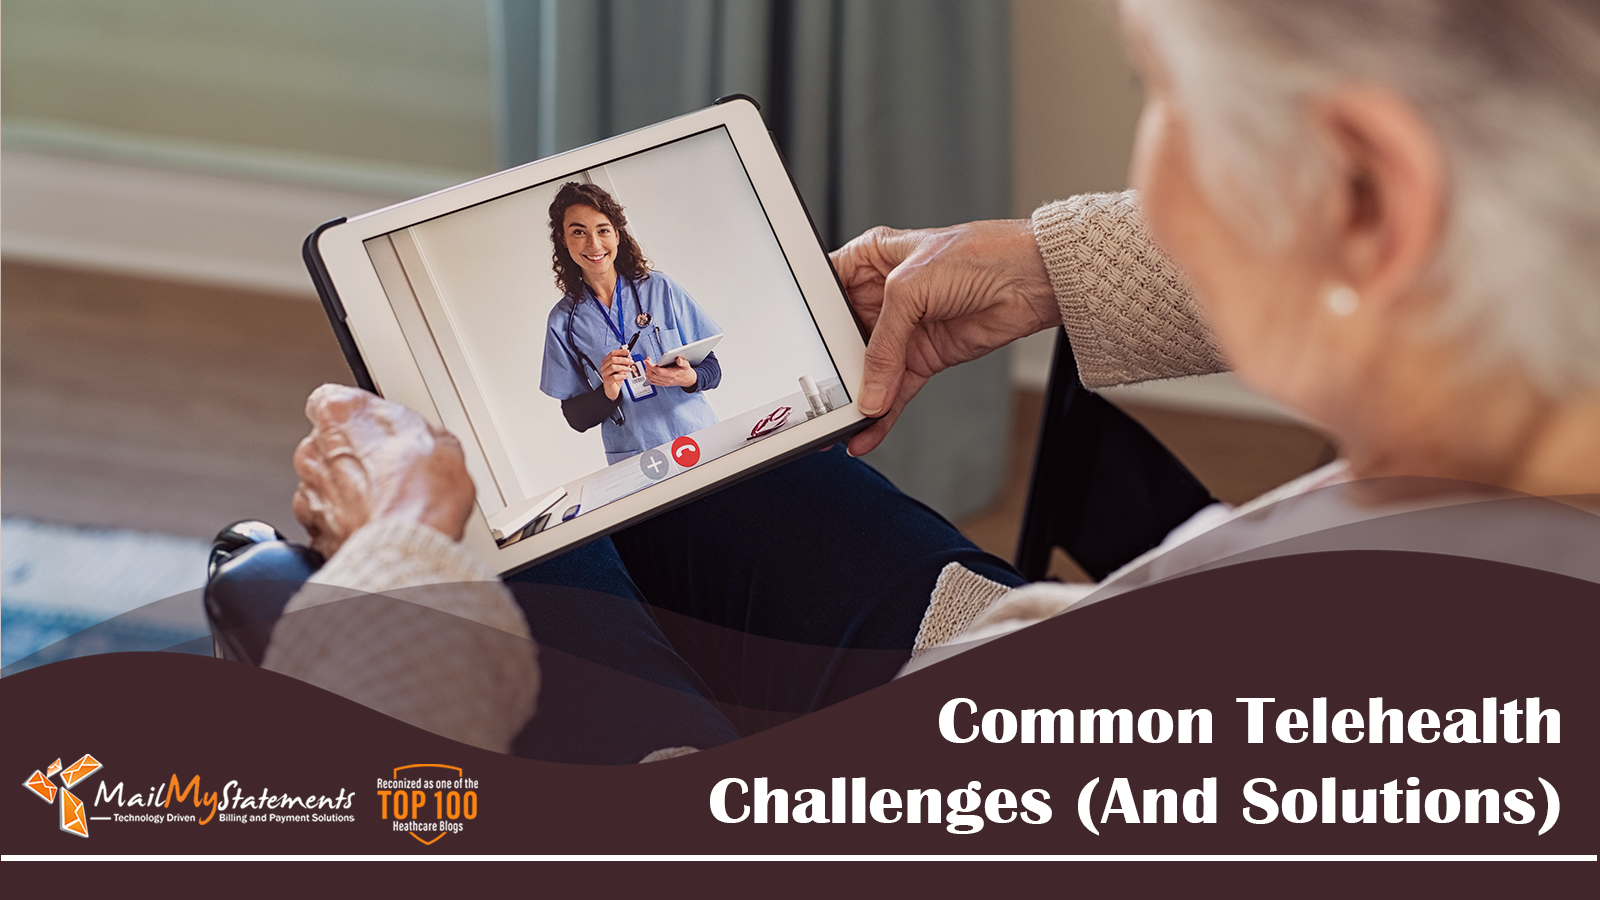 Common Telehealth Challenges (And Solutions)